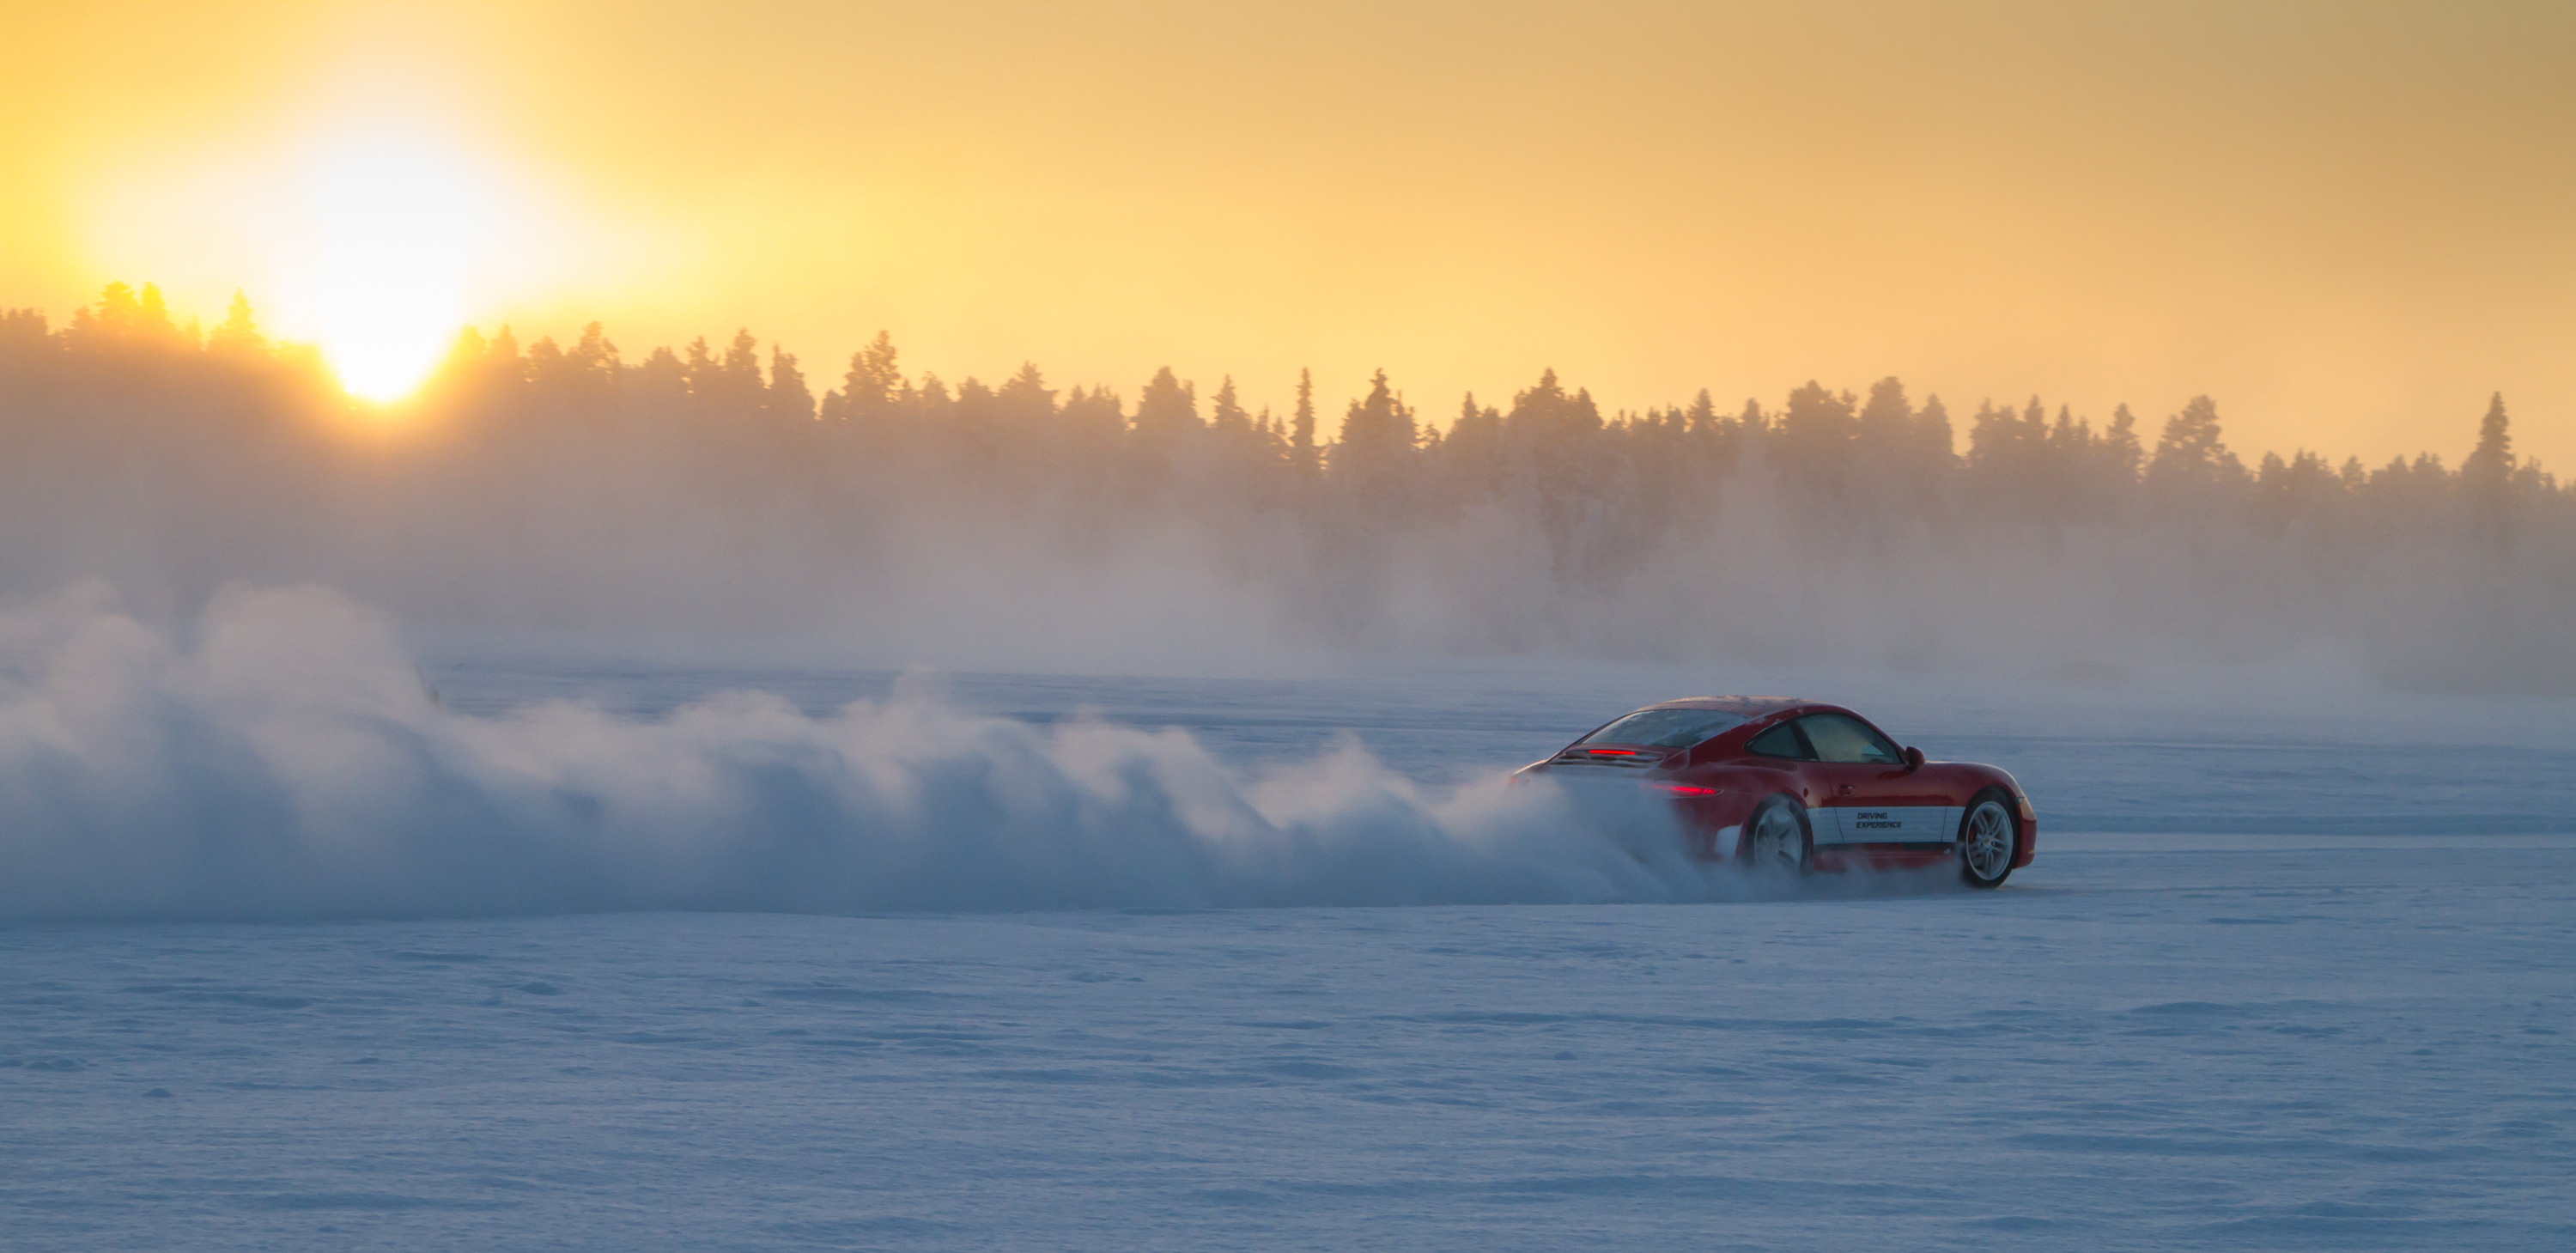 A red Porsche with a white stripe speeds along a snowy trail near sunset, leaving a cloud of snow in its wake.